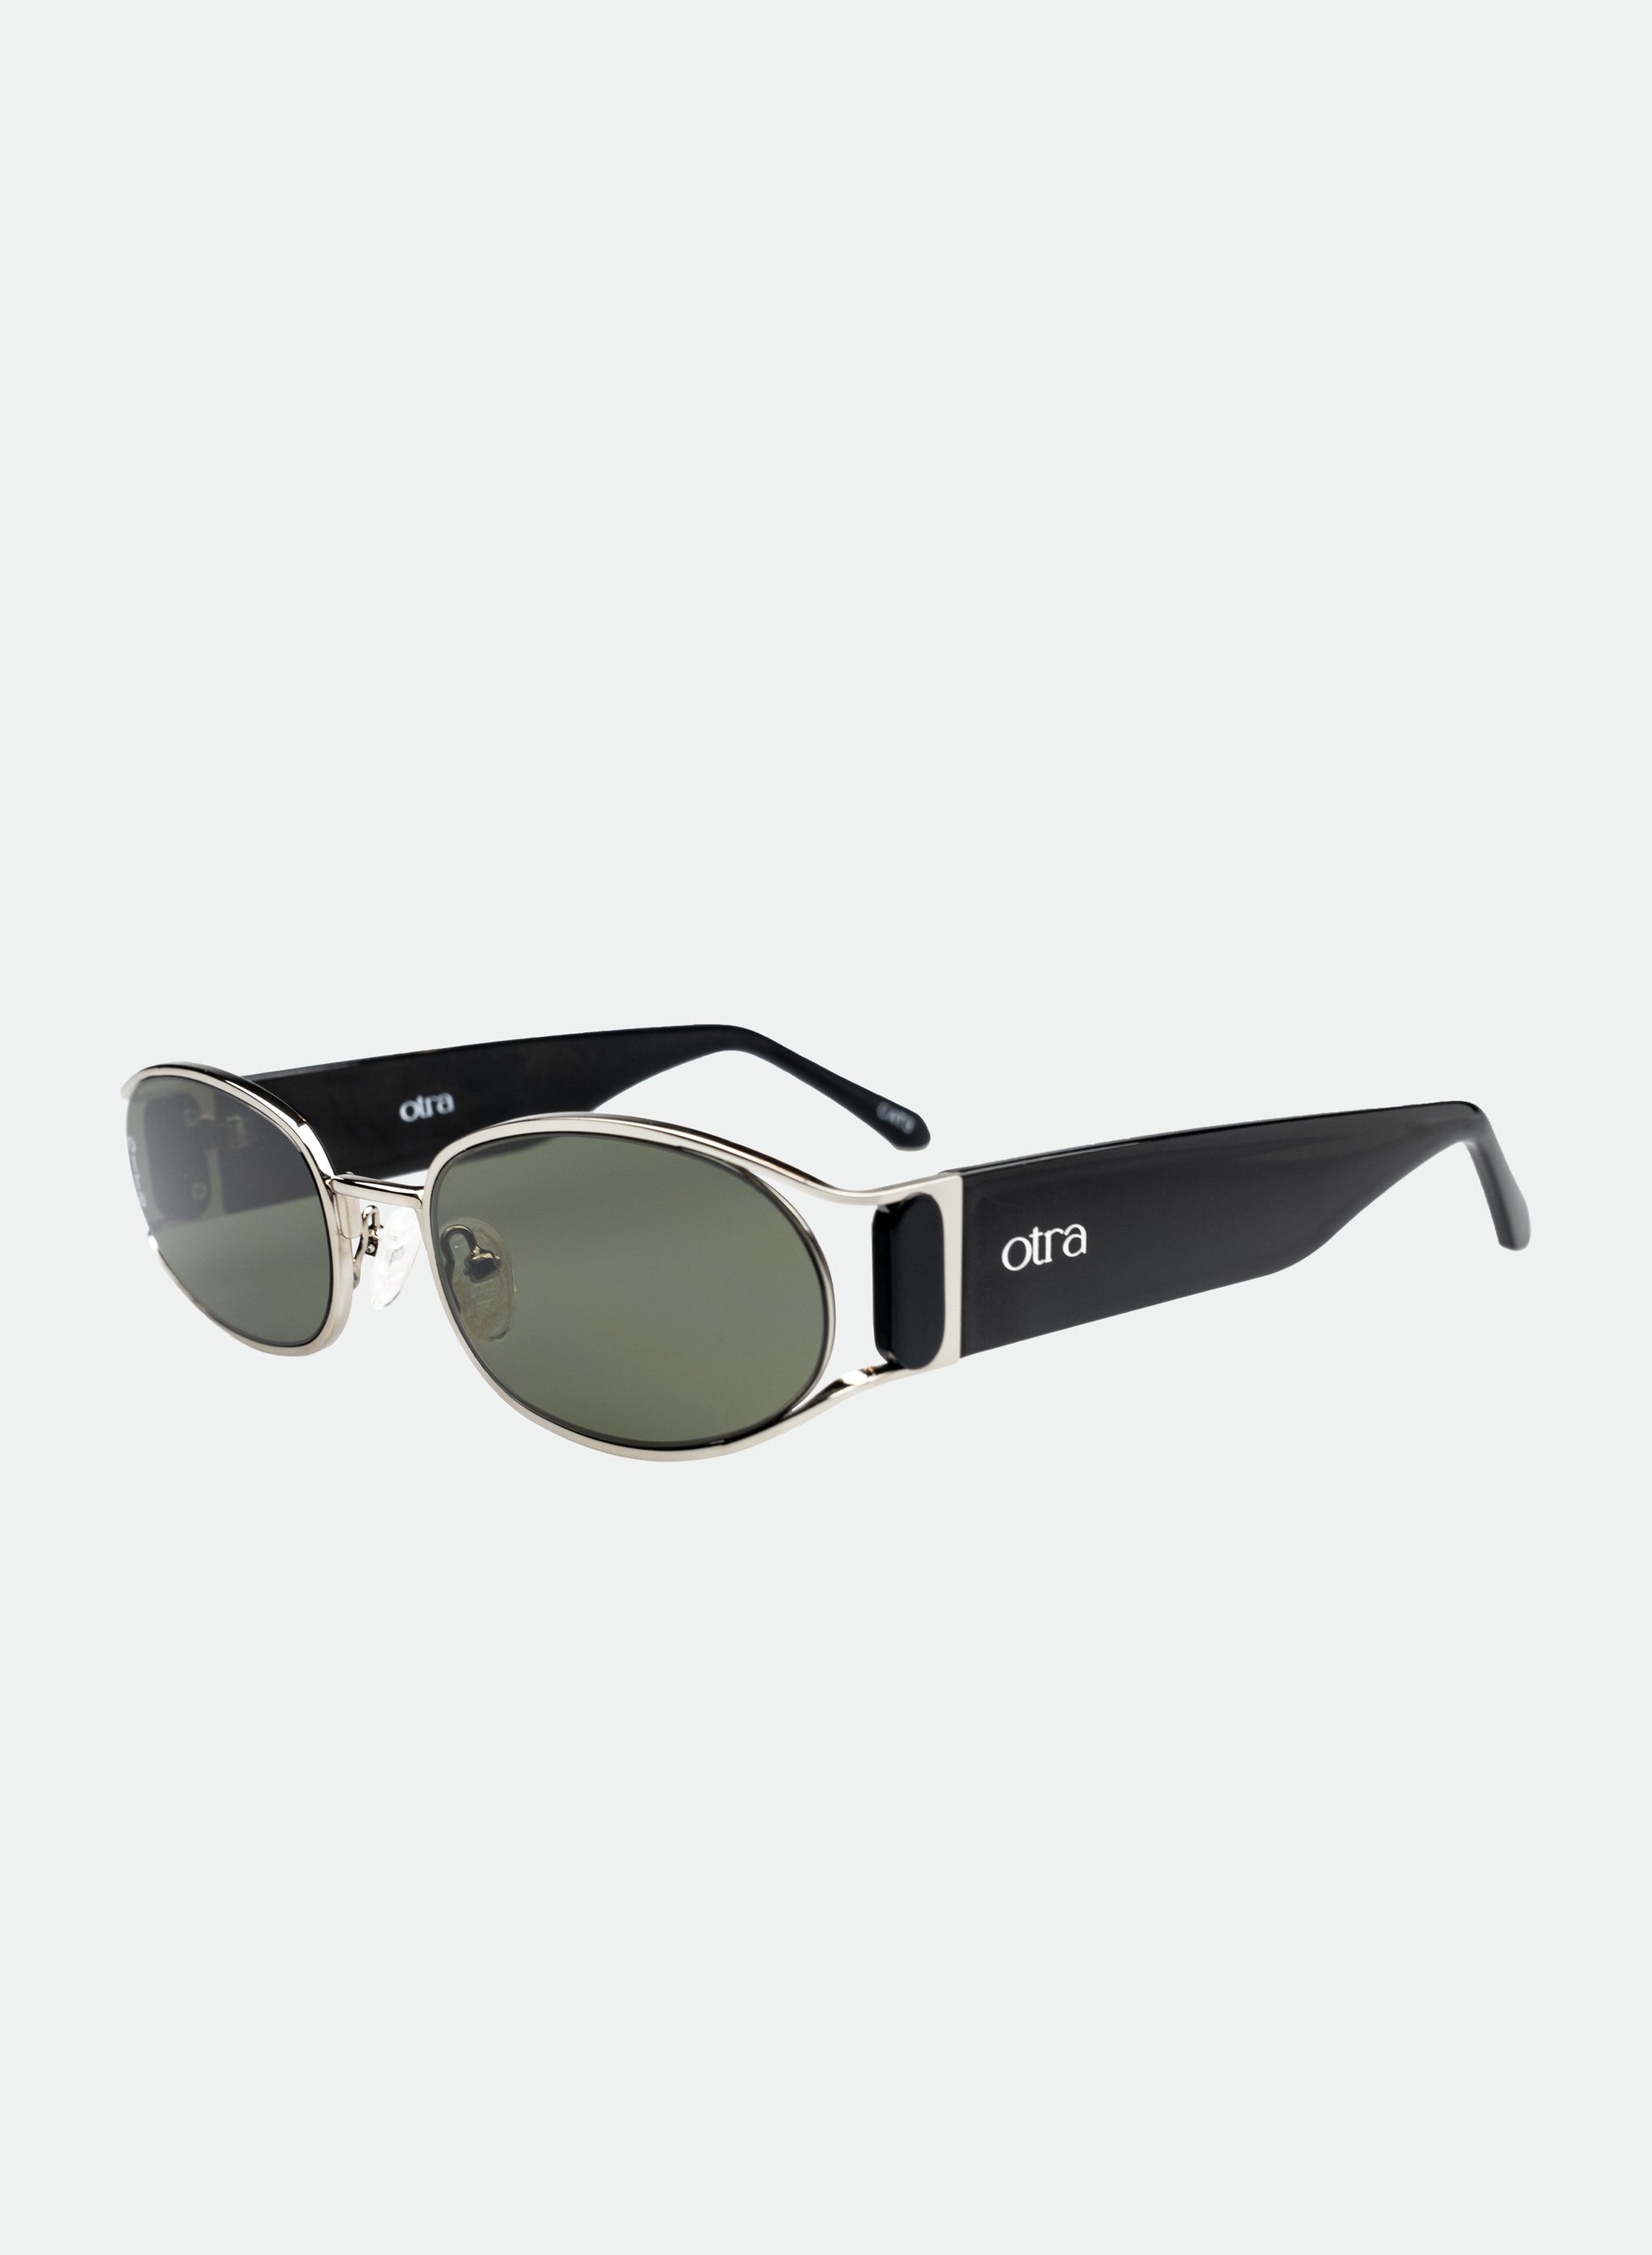 Polly sunglasses in silver black side view